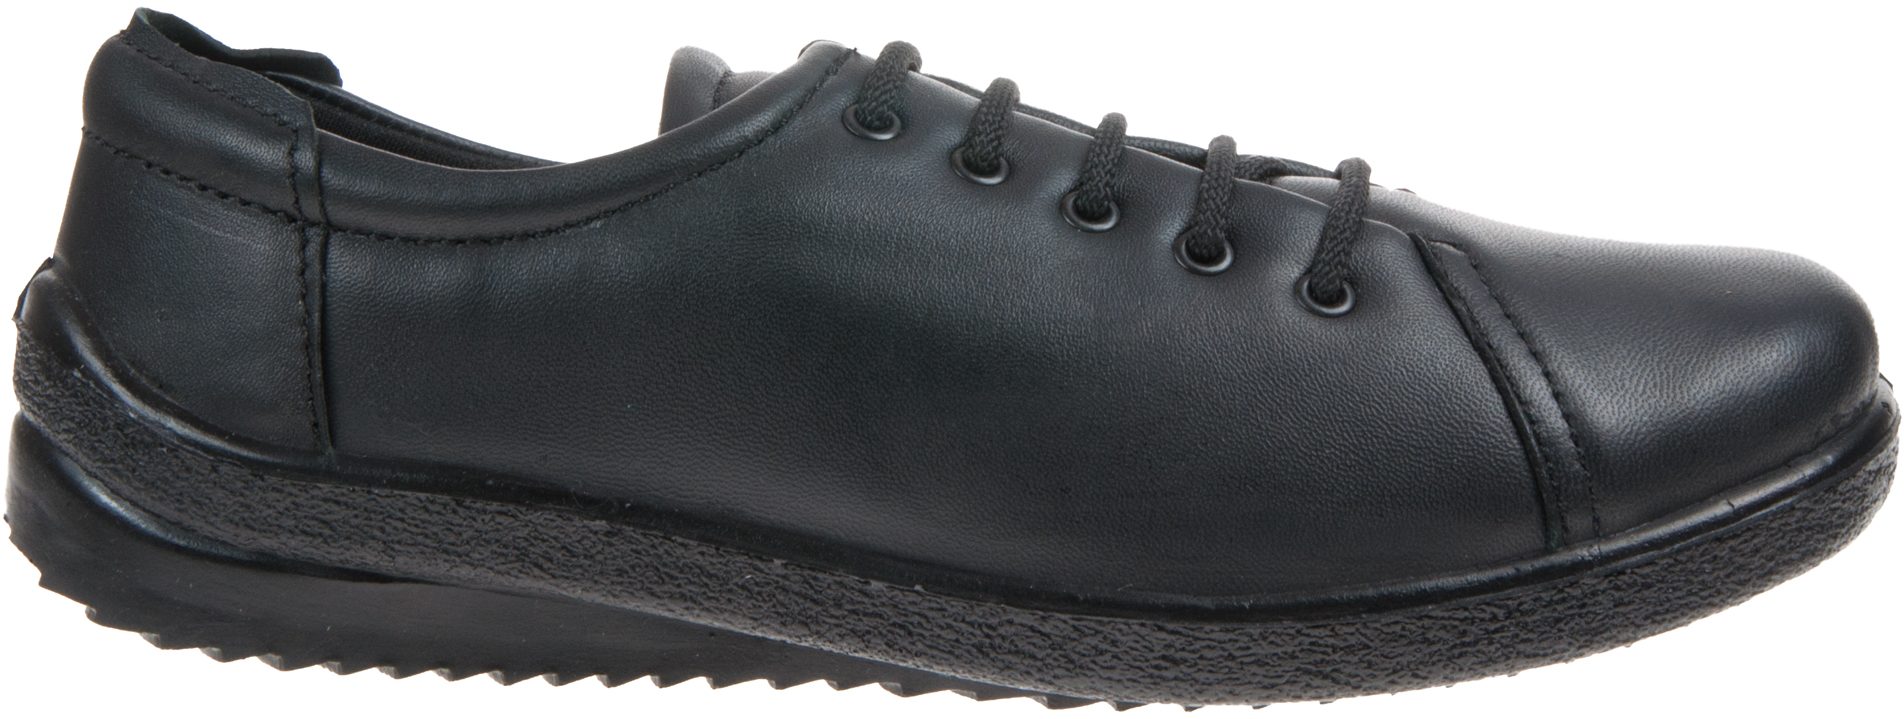 Sleepers Lindsay Black Leather L994A - Everyday Shoes - Humphries Shoes